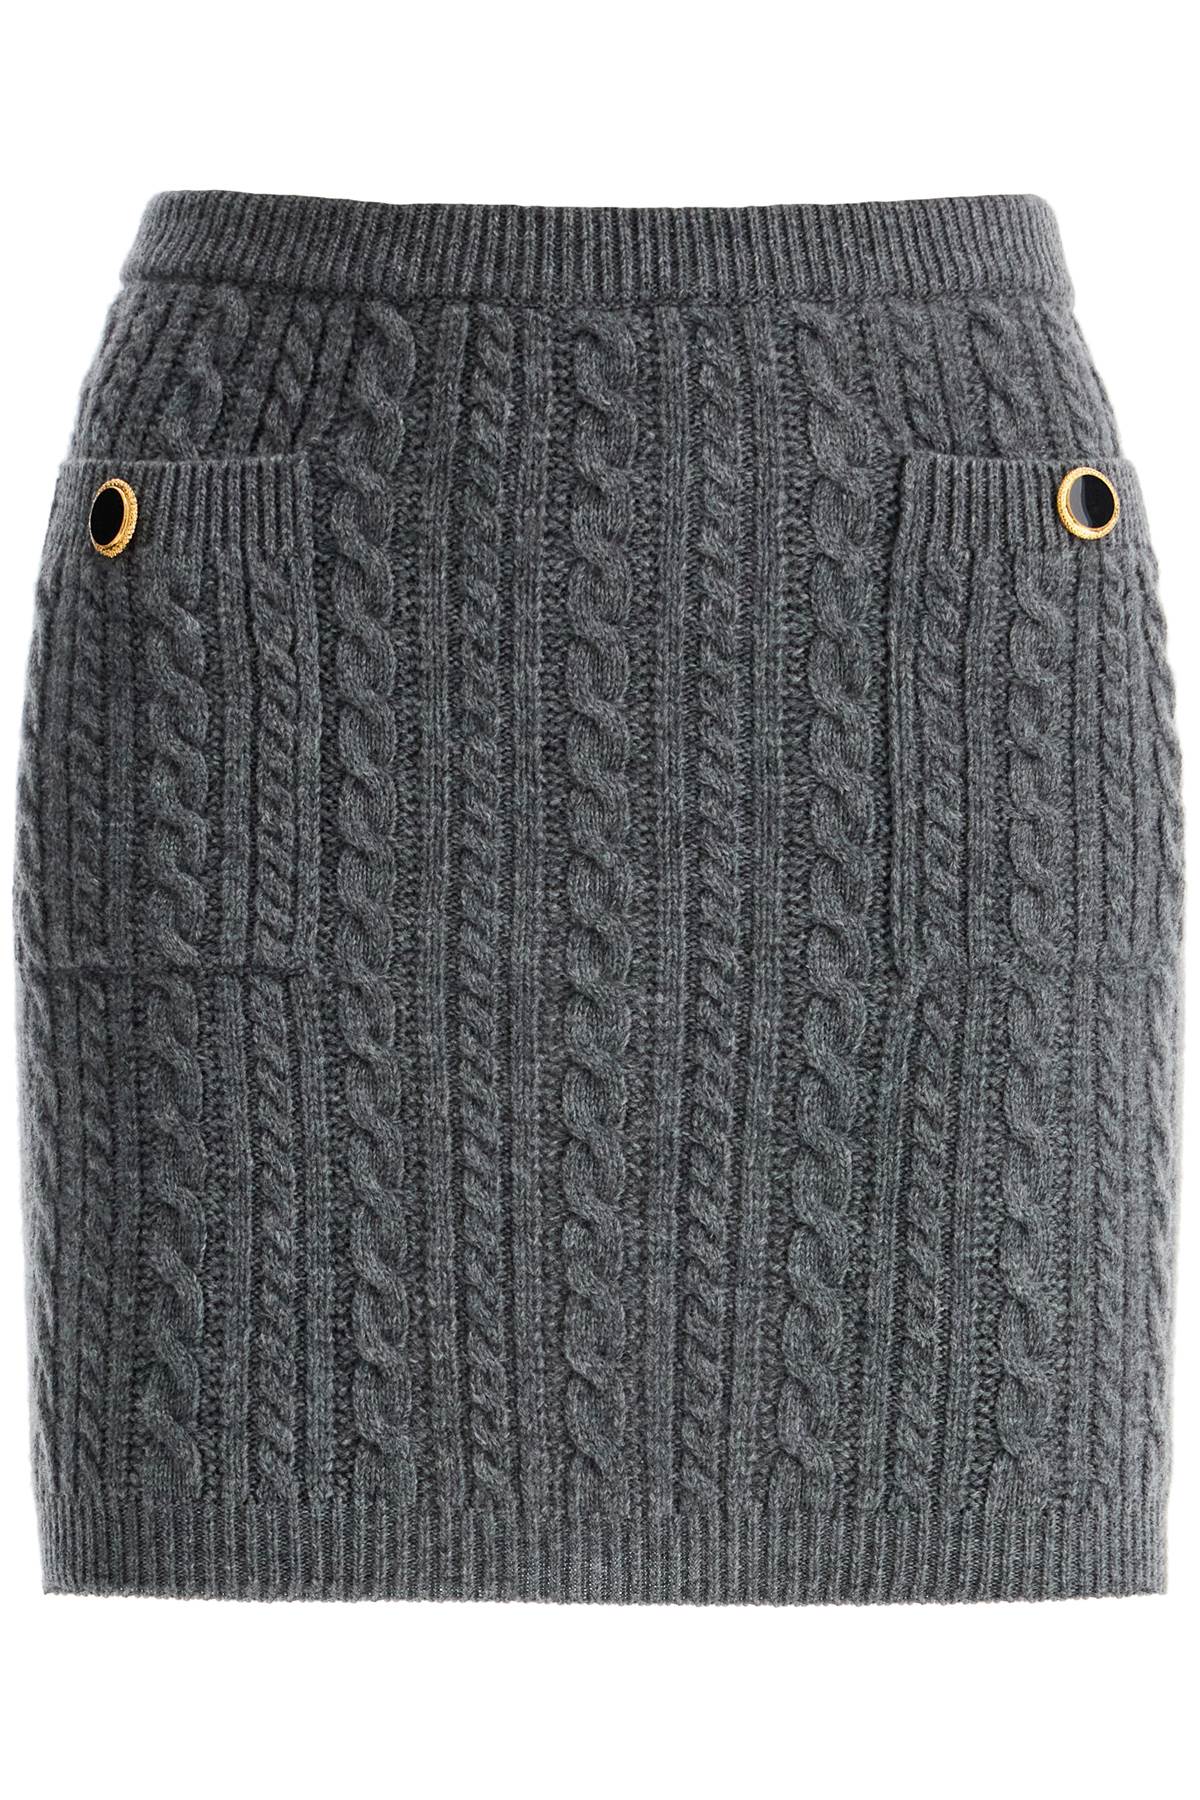 Alessandra Rich ALESSANDRA RICH knitted mini skirt with braided